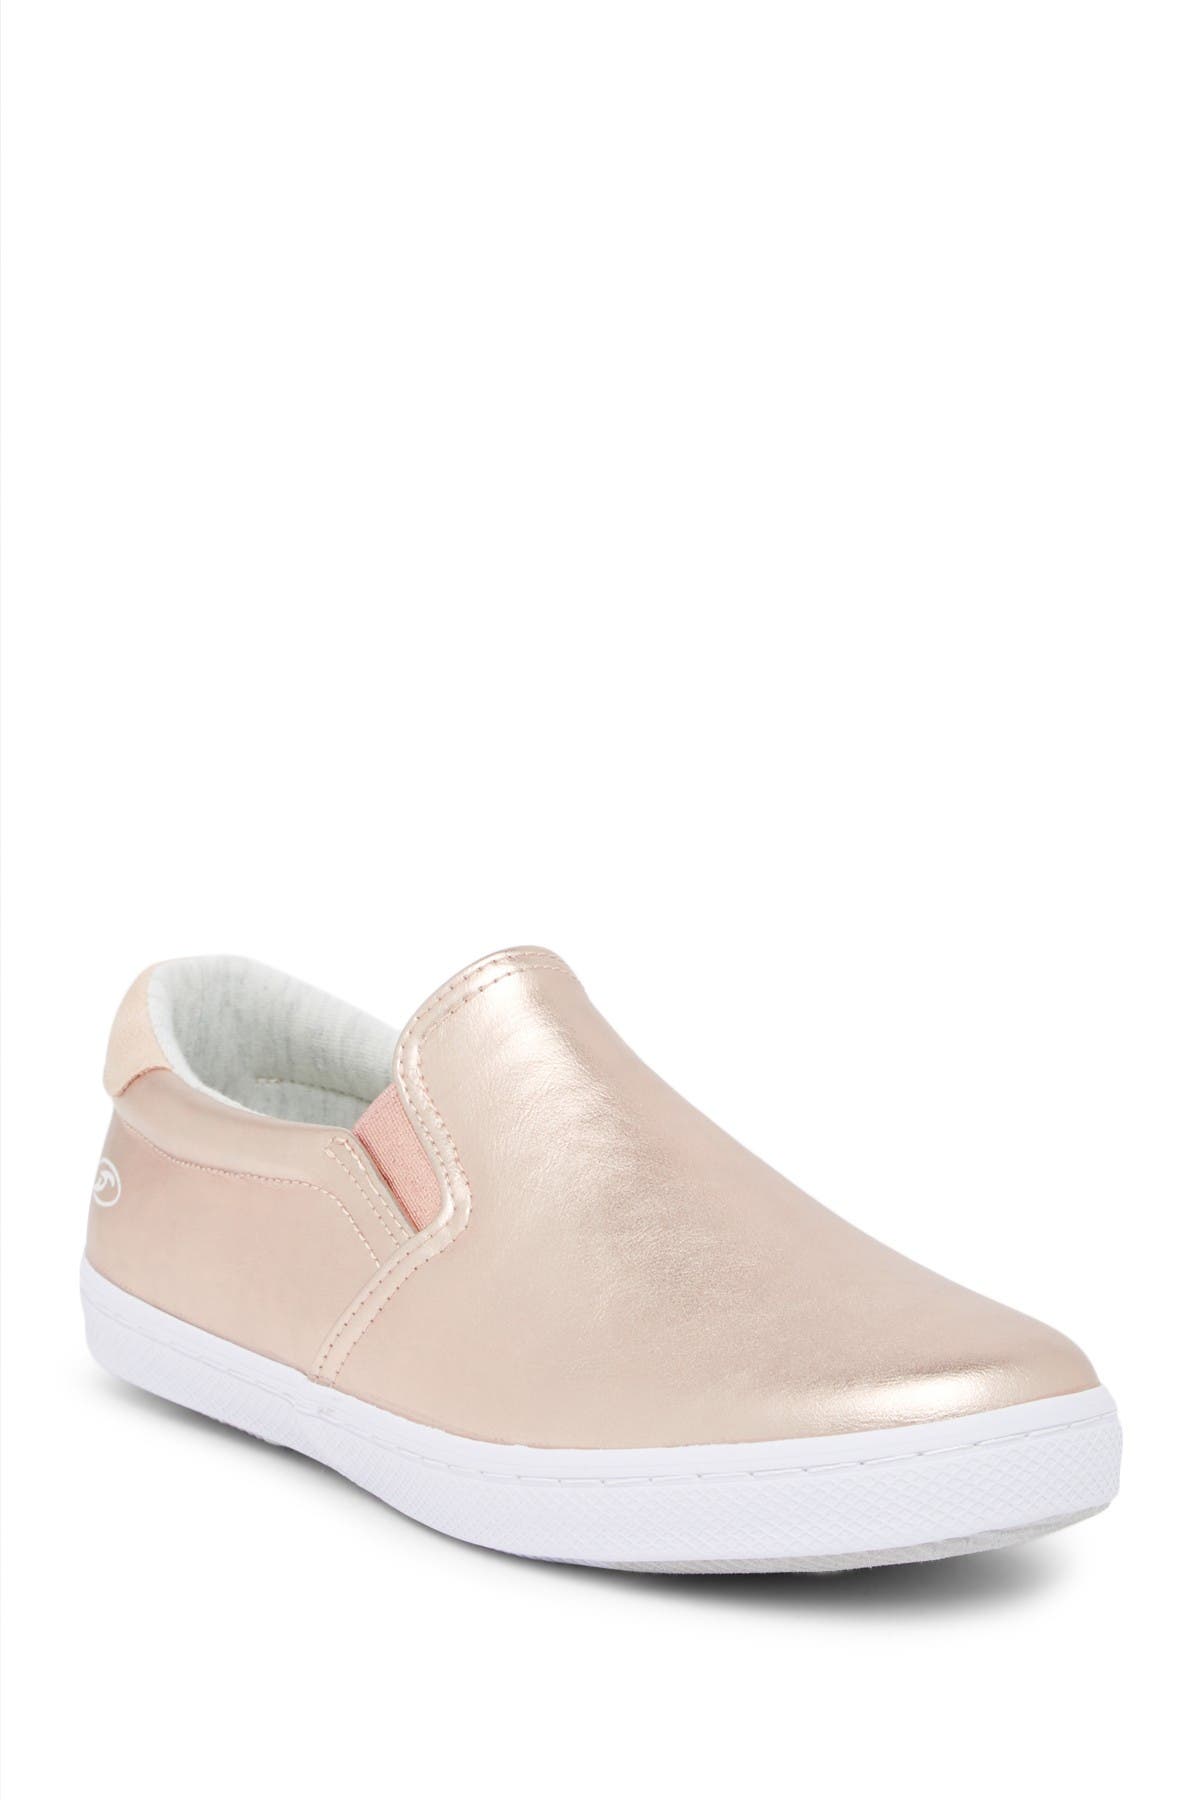 dr scholl's madison rose gold